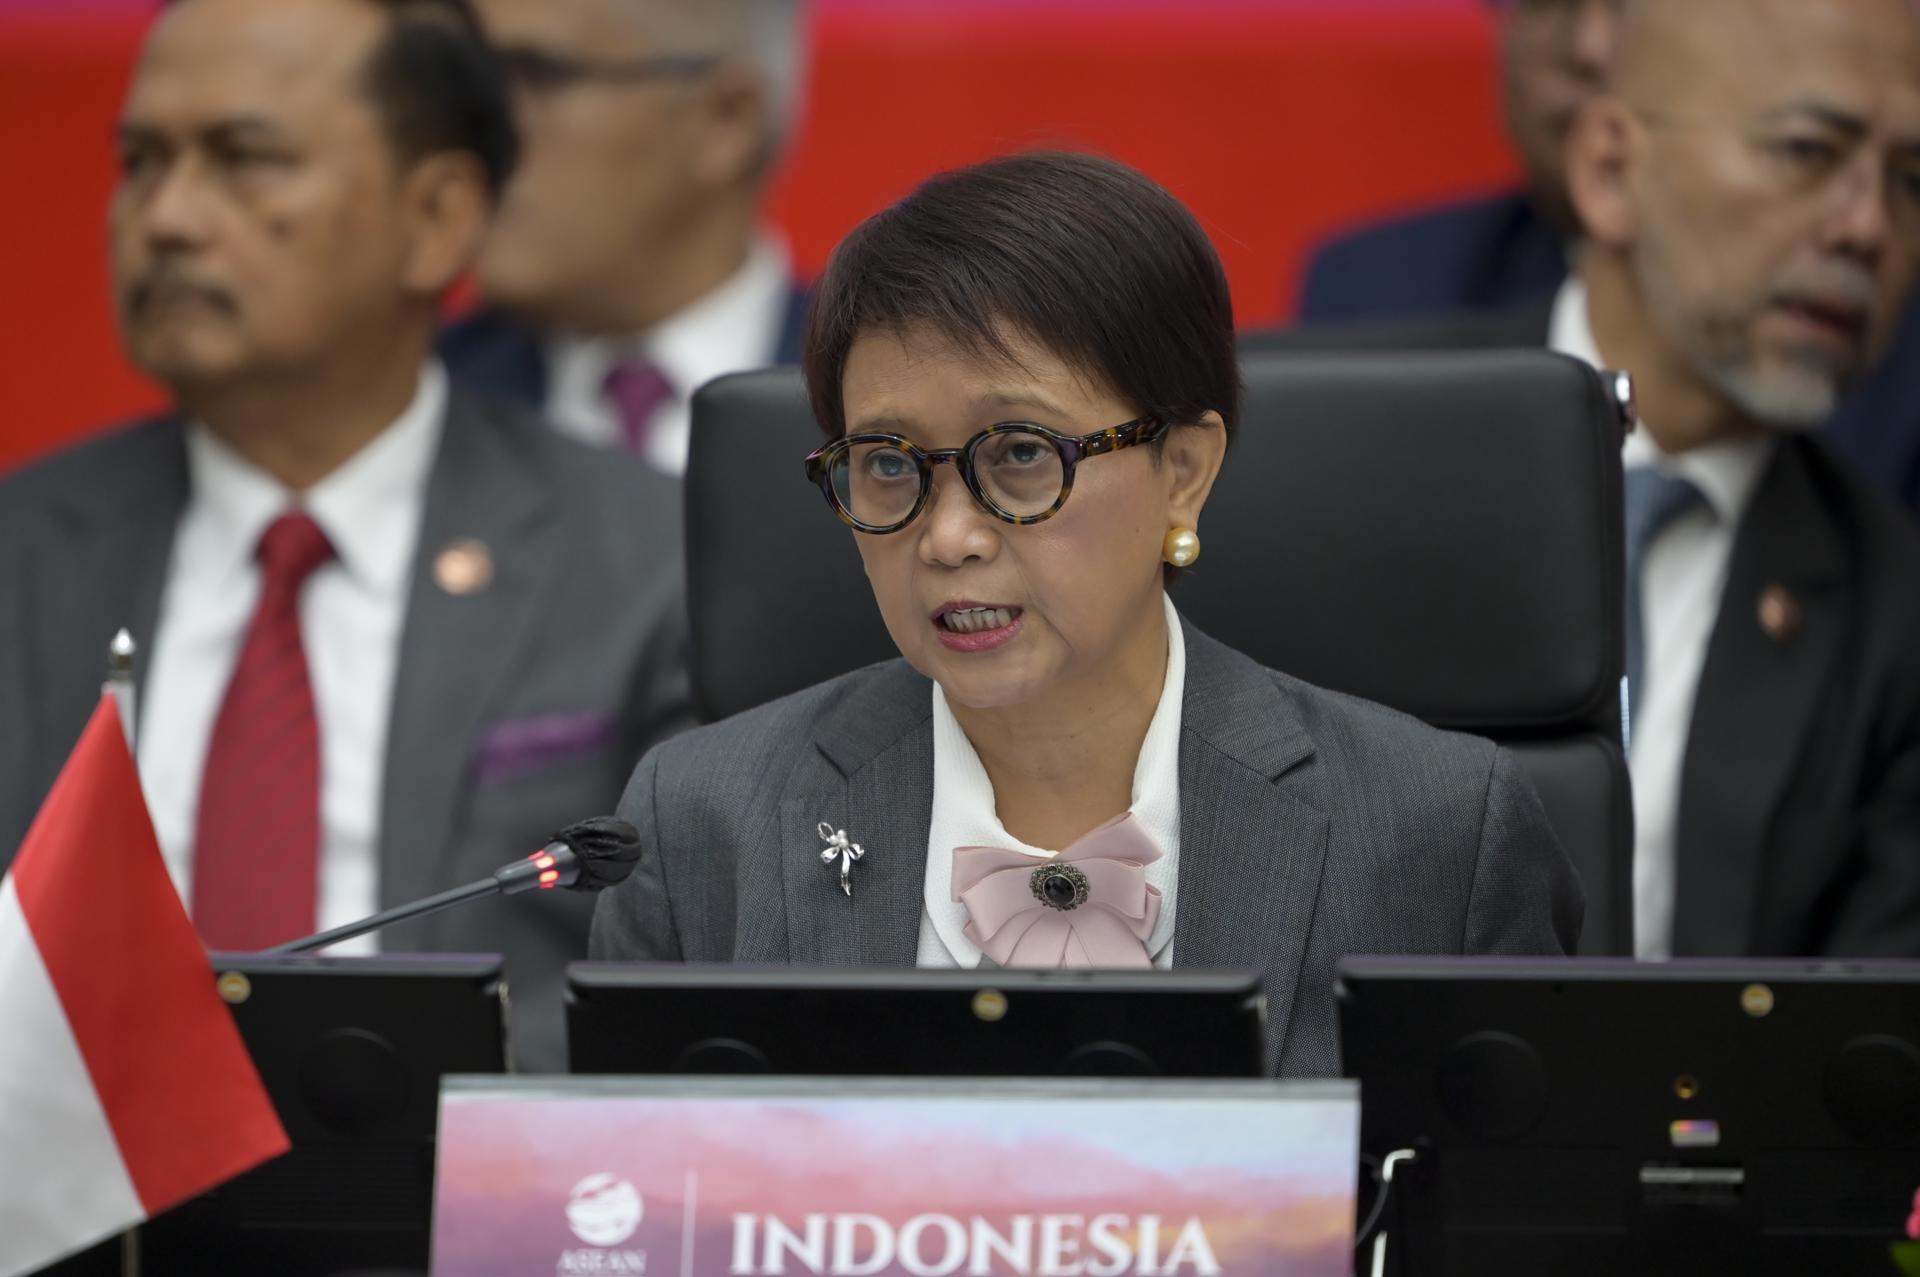 Indonesia's Foreign Minister Retno Marsudi (C) delivers her opening remarks during the Association of Southeast Asian Nations (ASEAN) Foreign Ministers's Meeting ahead of the ASEAN Summit, at the ASEAN Secretariat in Jakarta, Indonesia, 04 September 2023. EFE/EPA/BAY ISMOYO / POOL